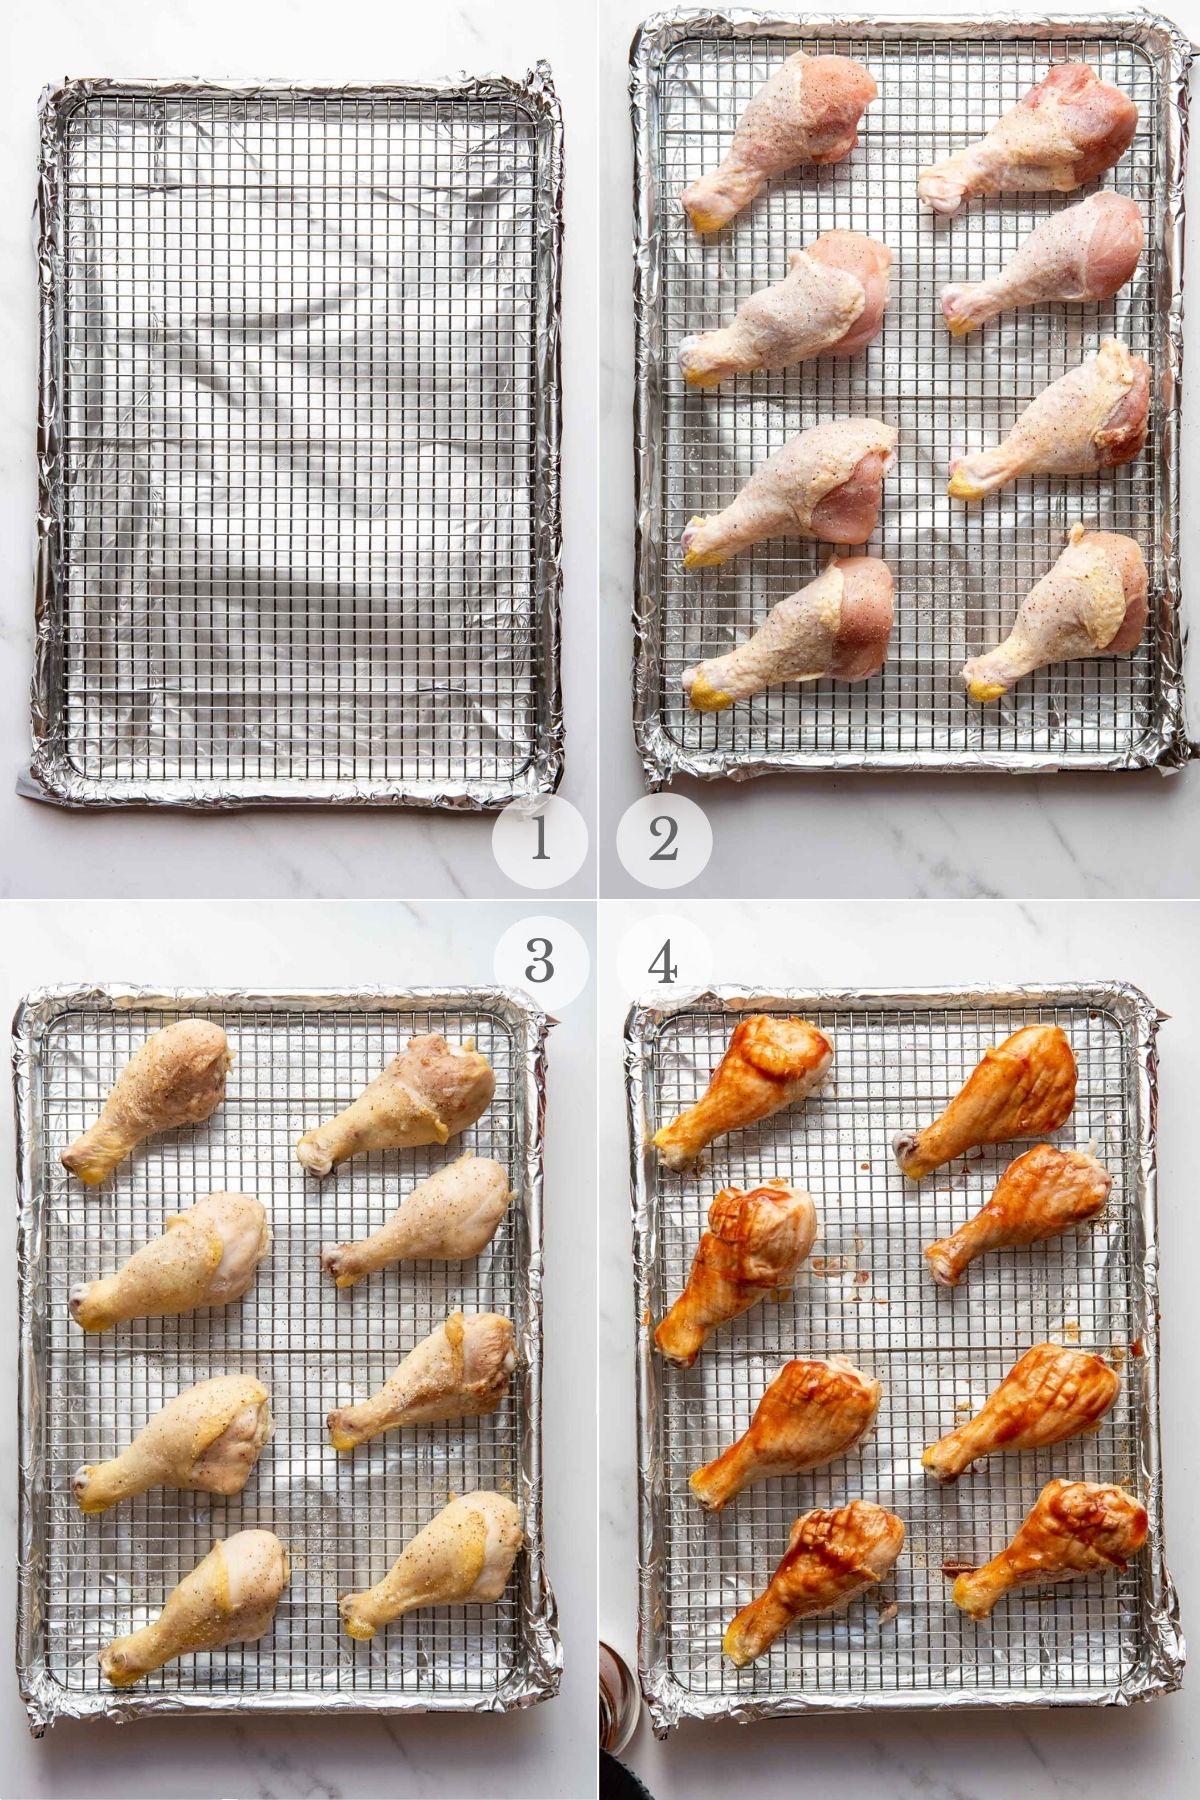 oven bbq chicken recipes steps collage 1-4